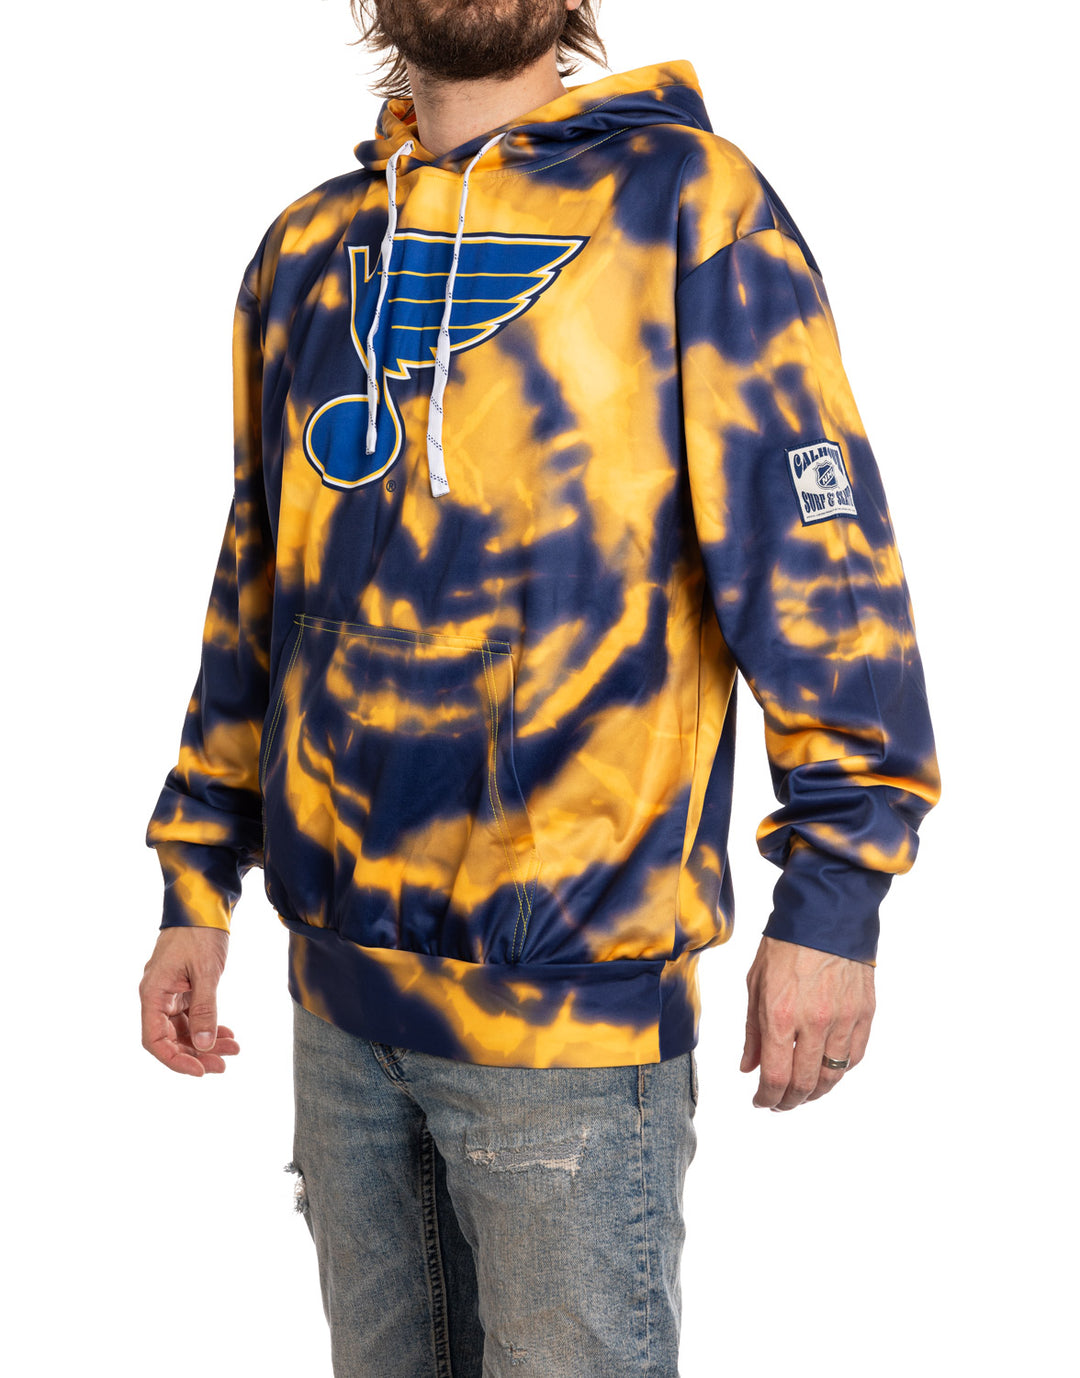 Official NHL licensed St. Louis Blues Tie Dye Sublimation Hoodie